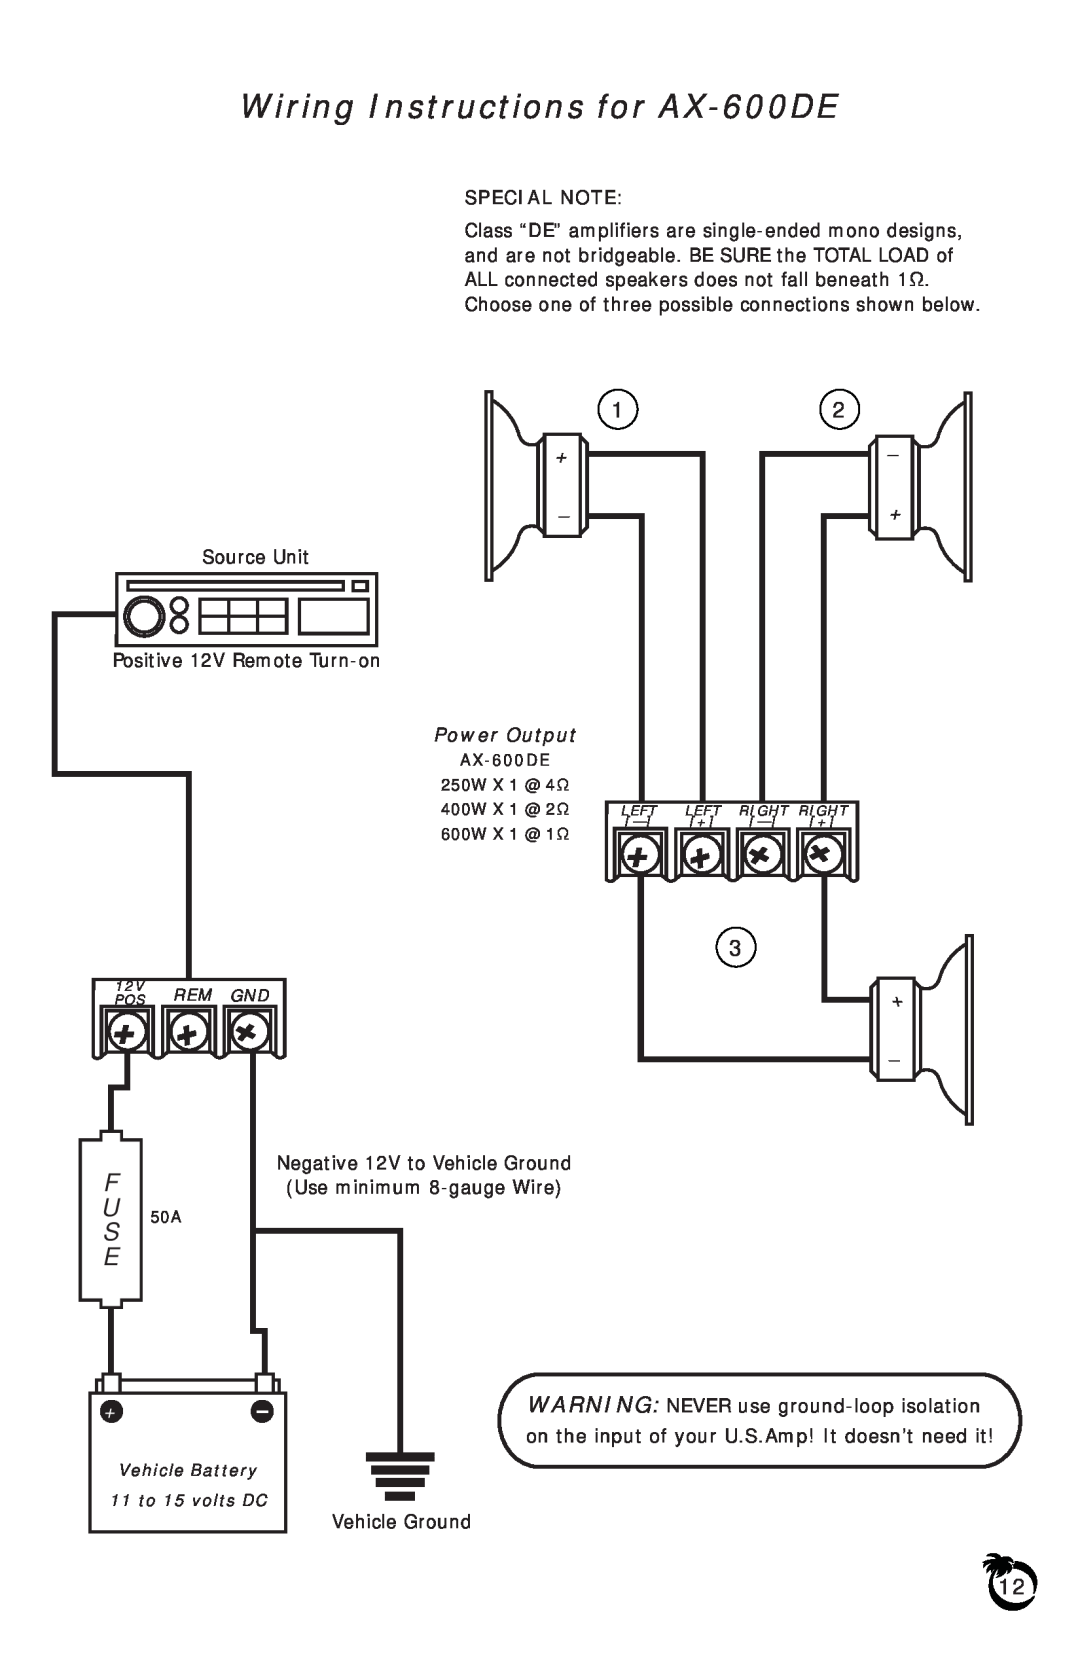 US Amps owner manual Wiring Instructions for AX-600DE, Special Note 